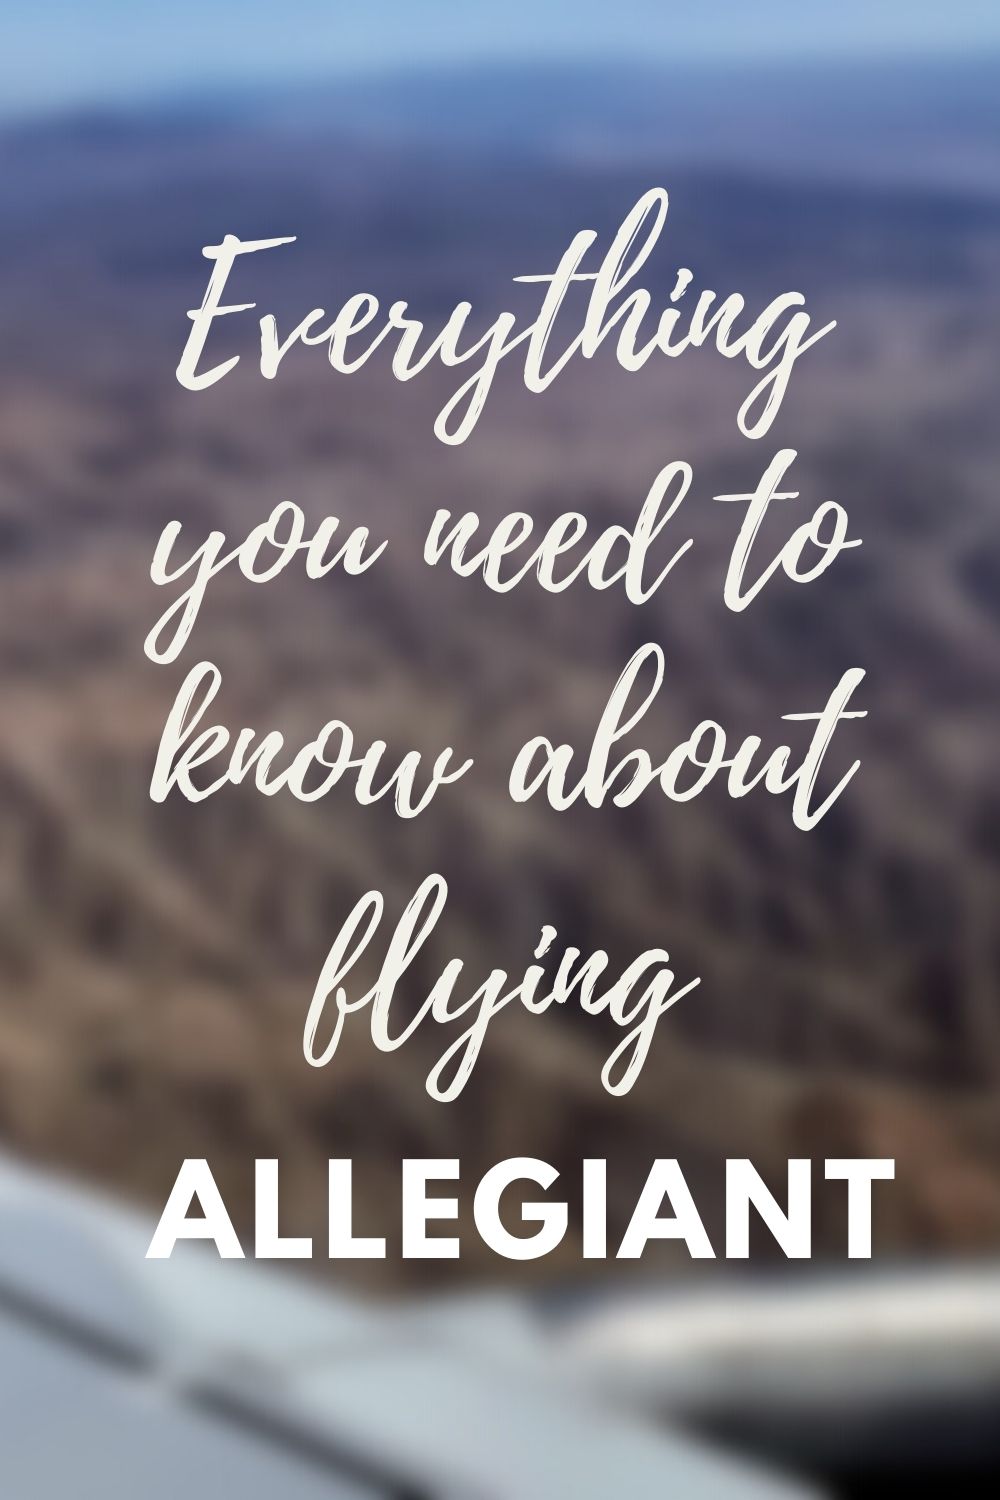 Allegiant Airlines Review: Should I Fly Allegiant Air?